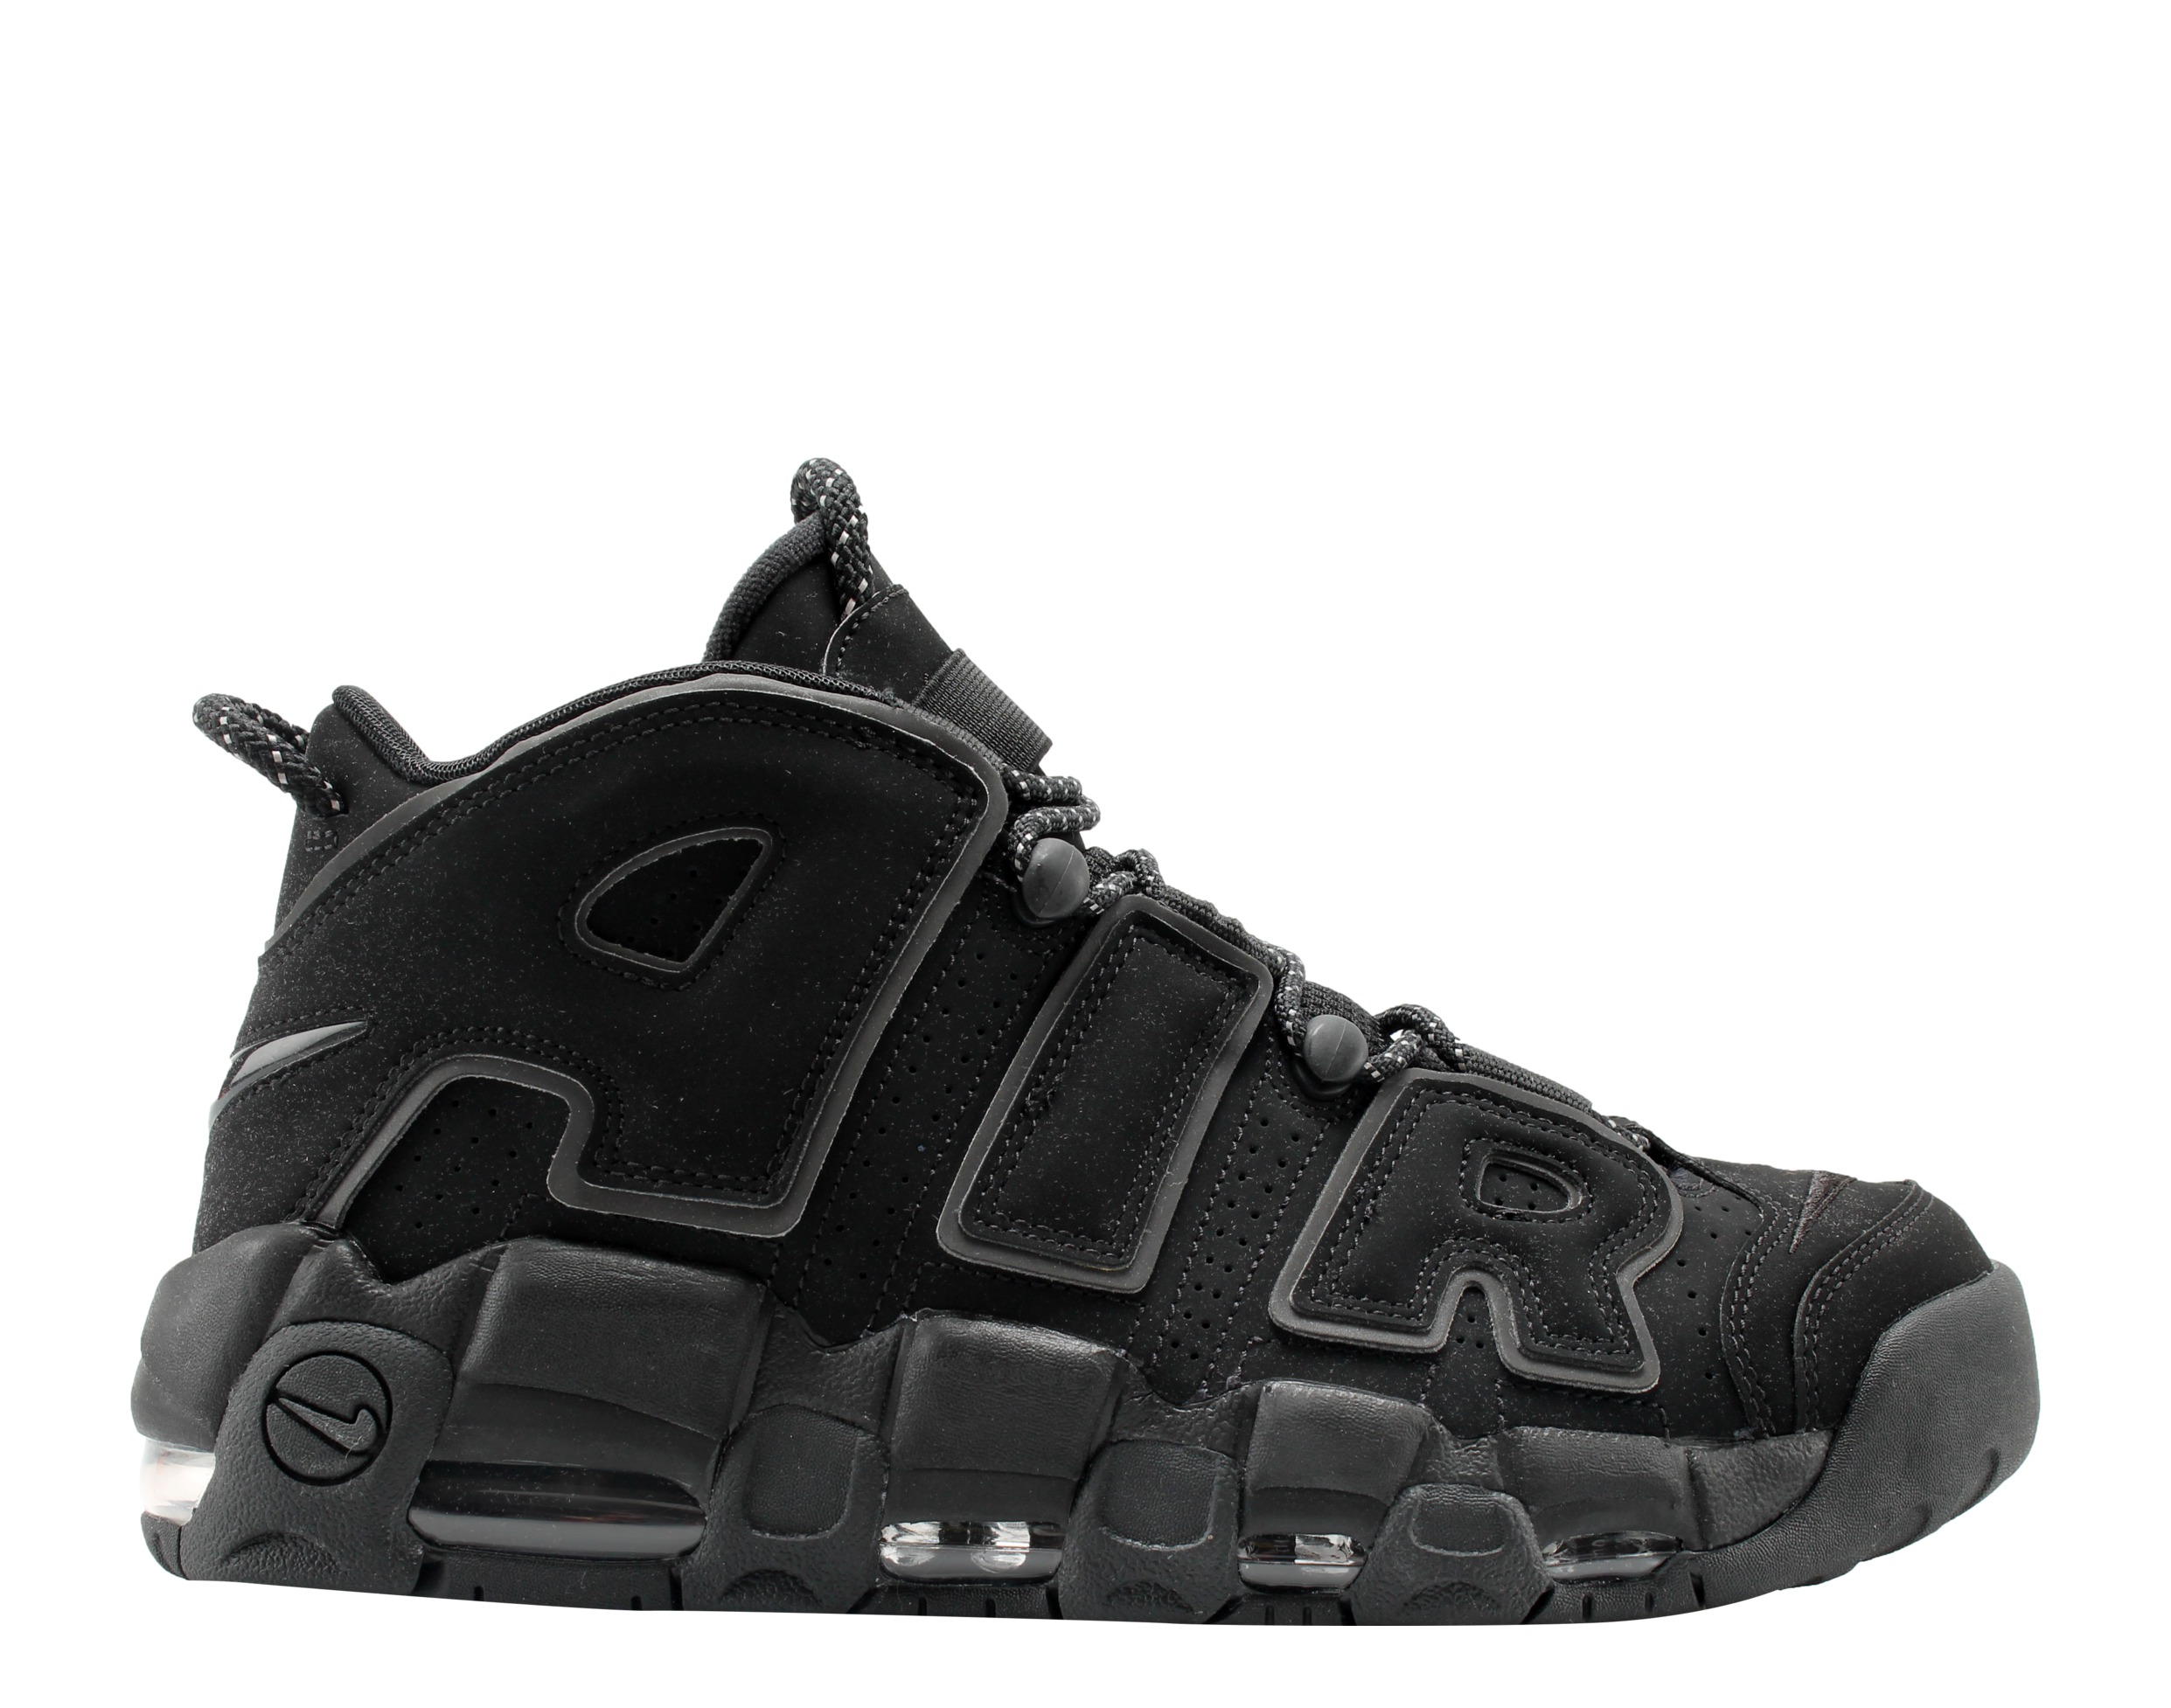 Nike Air More Uptempo Men's Basketball Shoes Size 8 - image 2 of 6